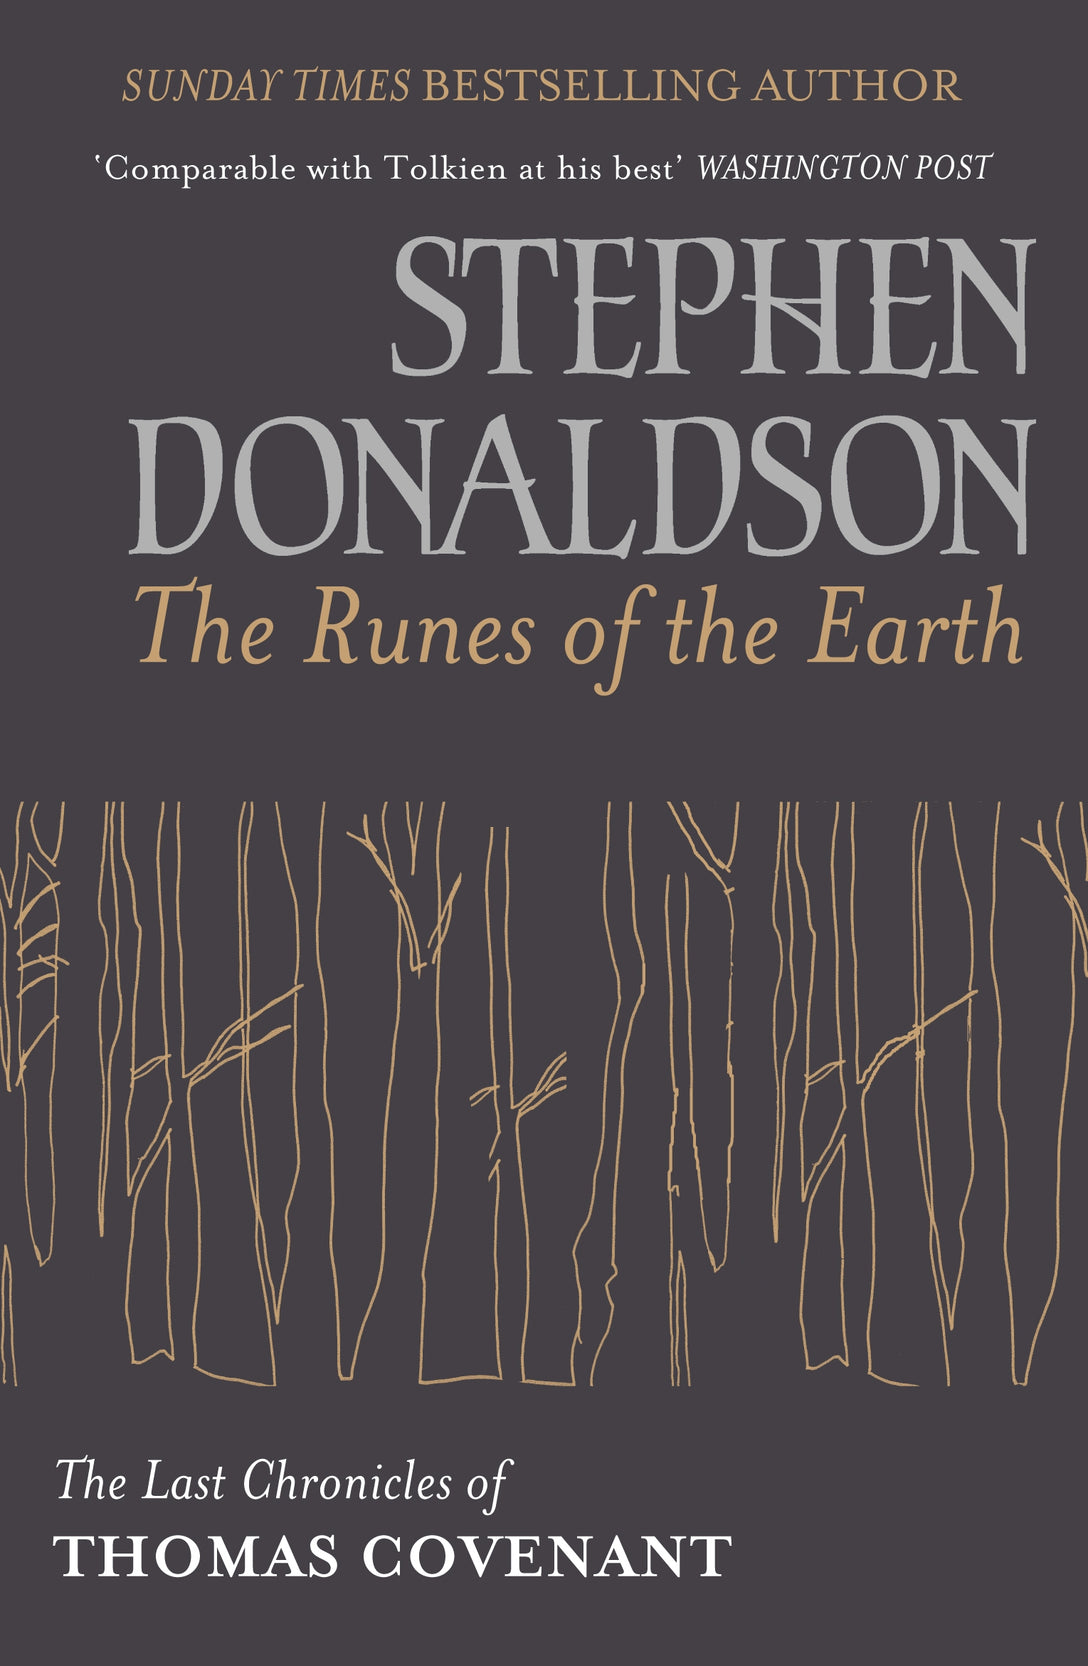 The Runes Of The Earth by Stephen Donaldson